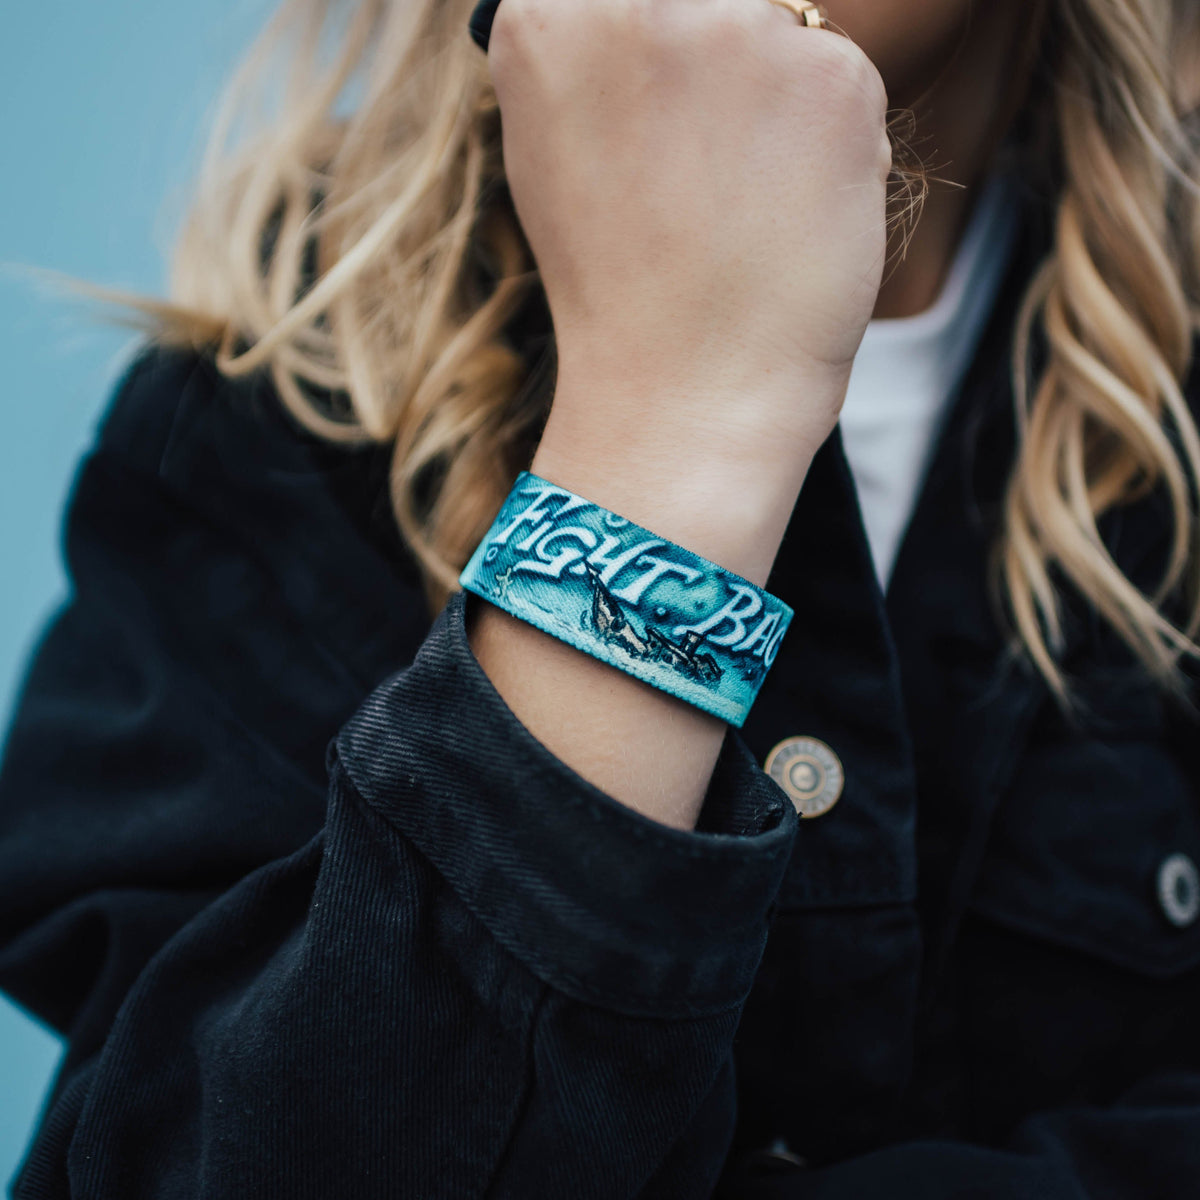 Fight Back-Sold Out-ZOX - This item is sold out and will not be restocked.